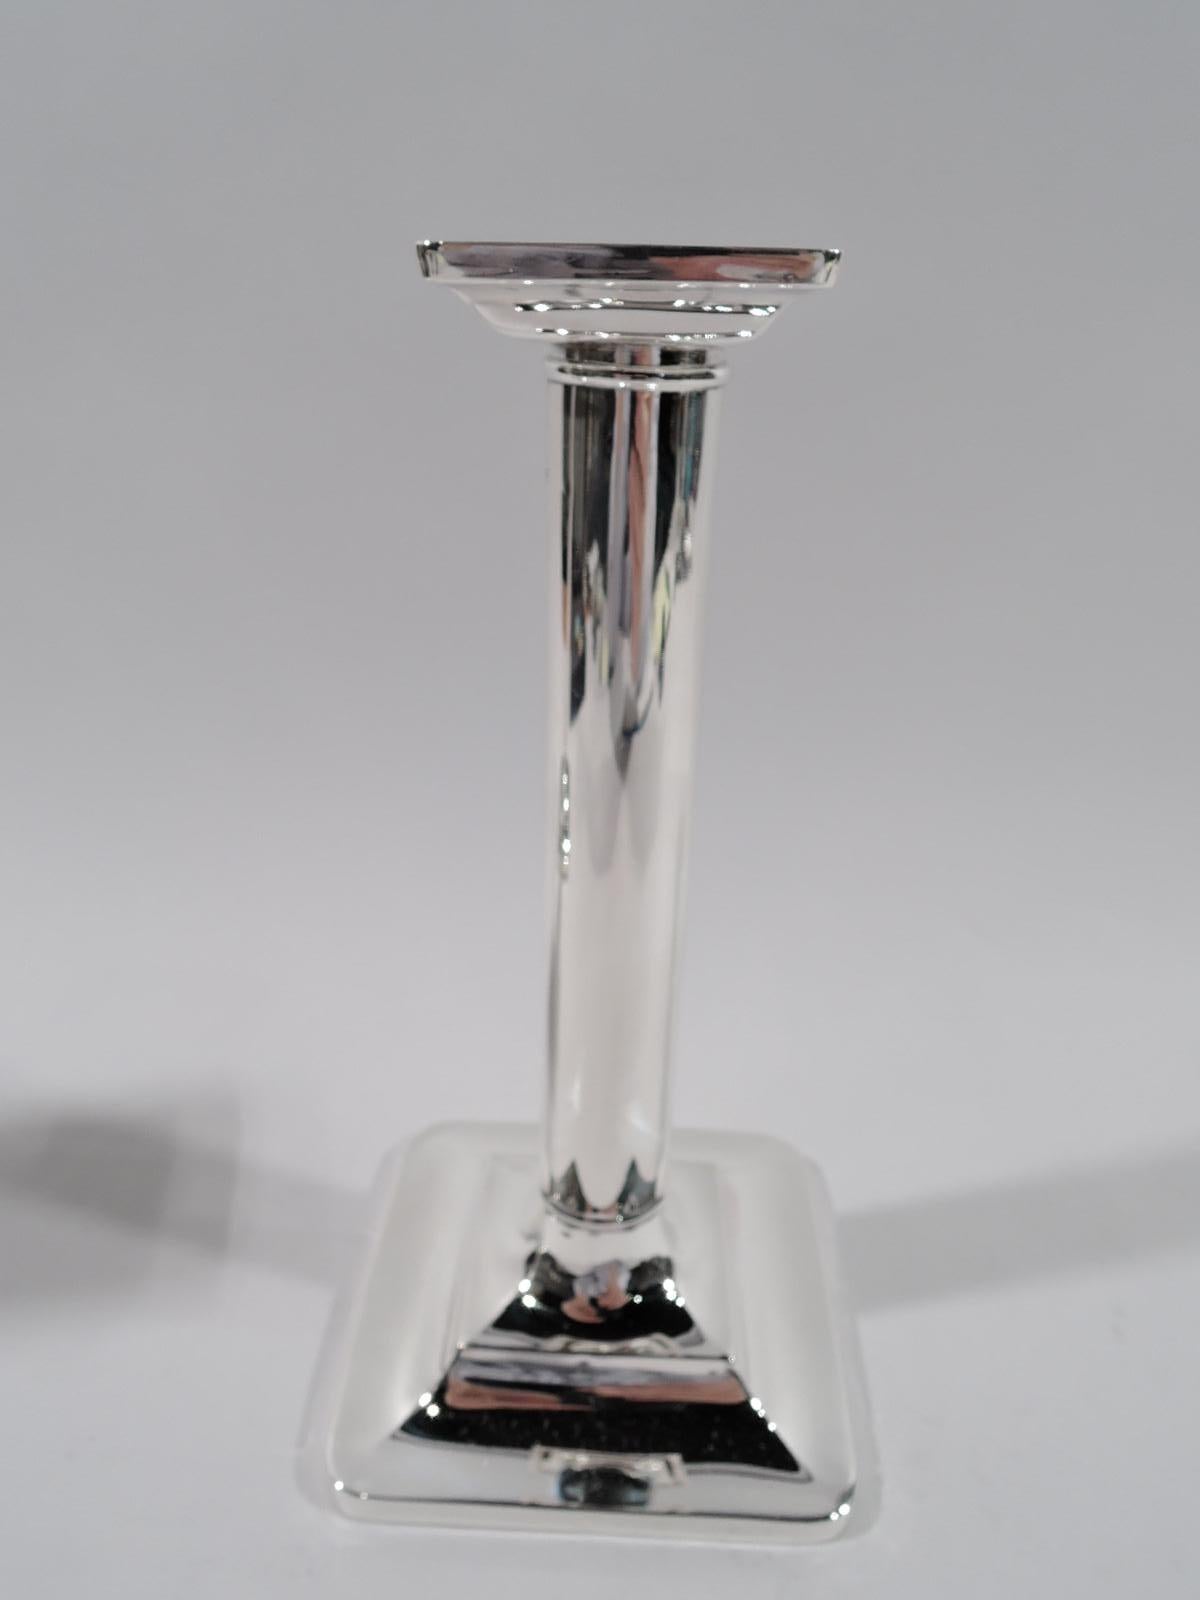 Pair of sterling silver candlesticks. Made by Tiffany & Co. in New York, circa 1910. Column shaft with knop at base; foot square and stepped; bobeche square and detachable. Spare Classicism. Fully marked including pattern no. 15893, order no. 2435,